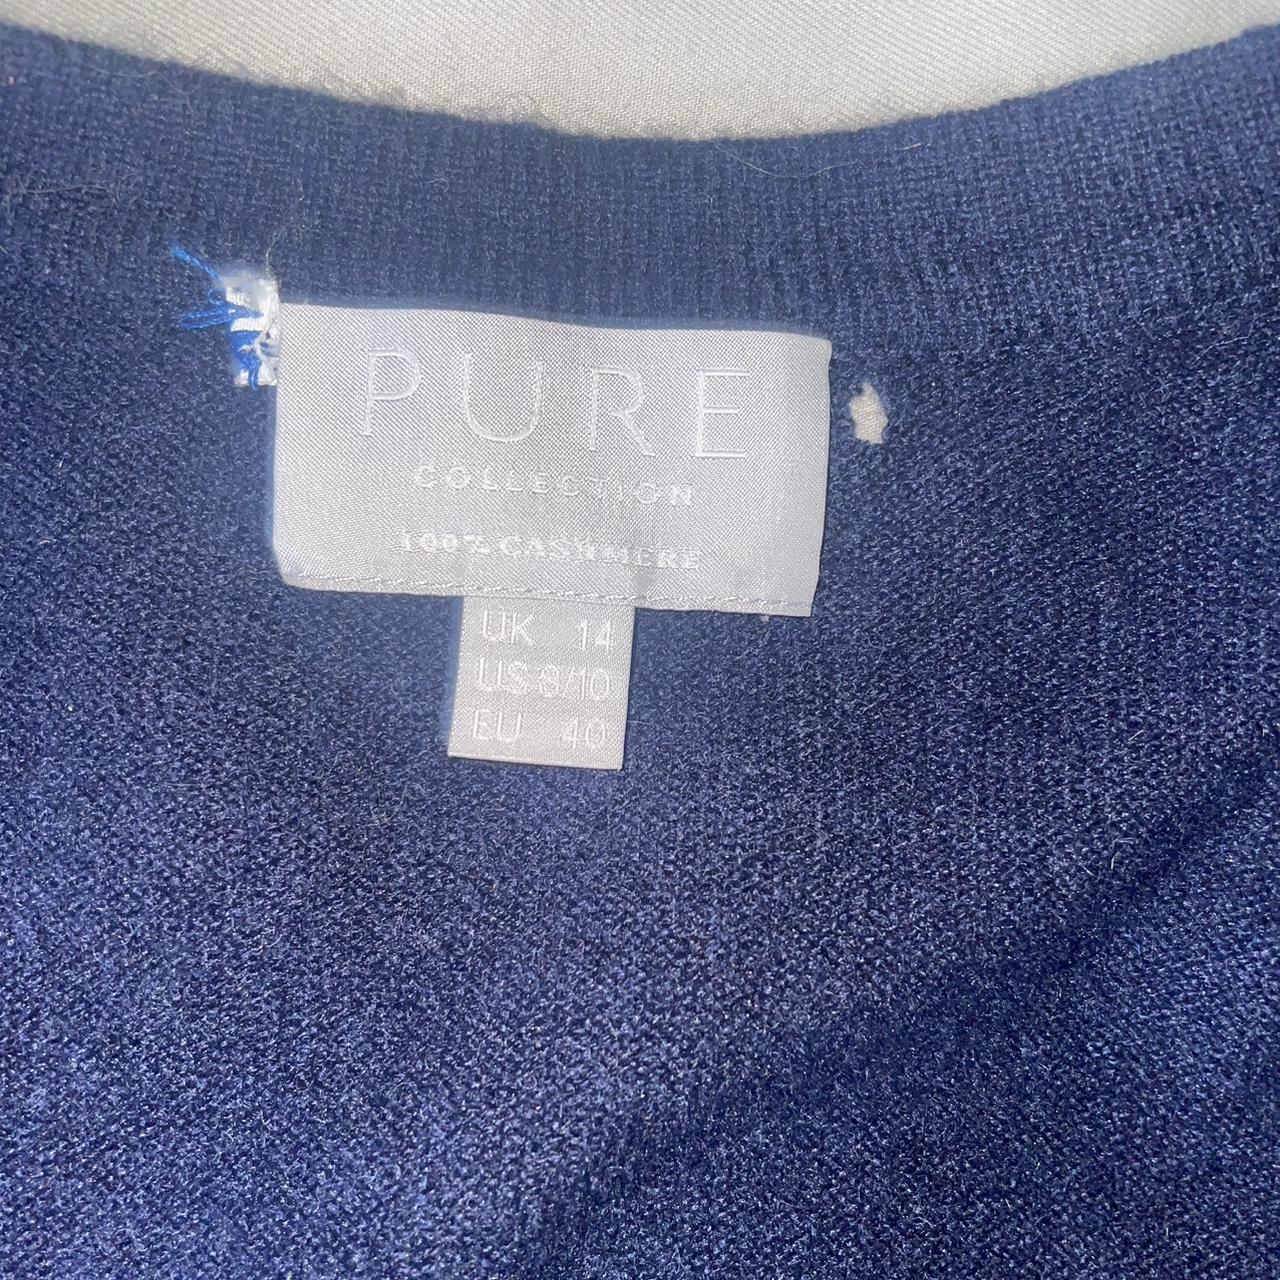 Pure 100% cashmere - basic navy cardigan from PURE... - Depop